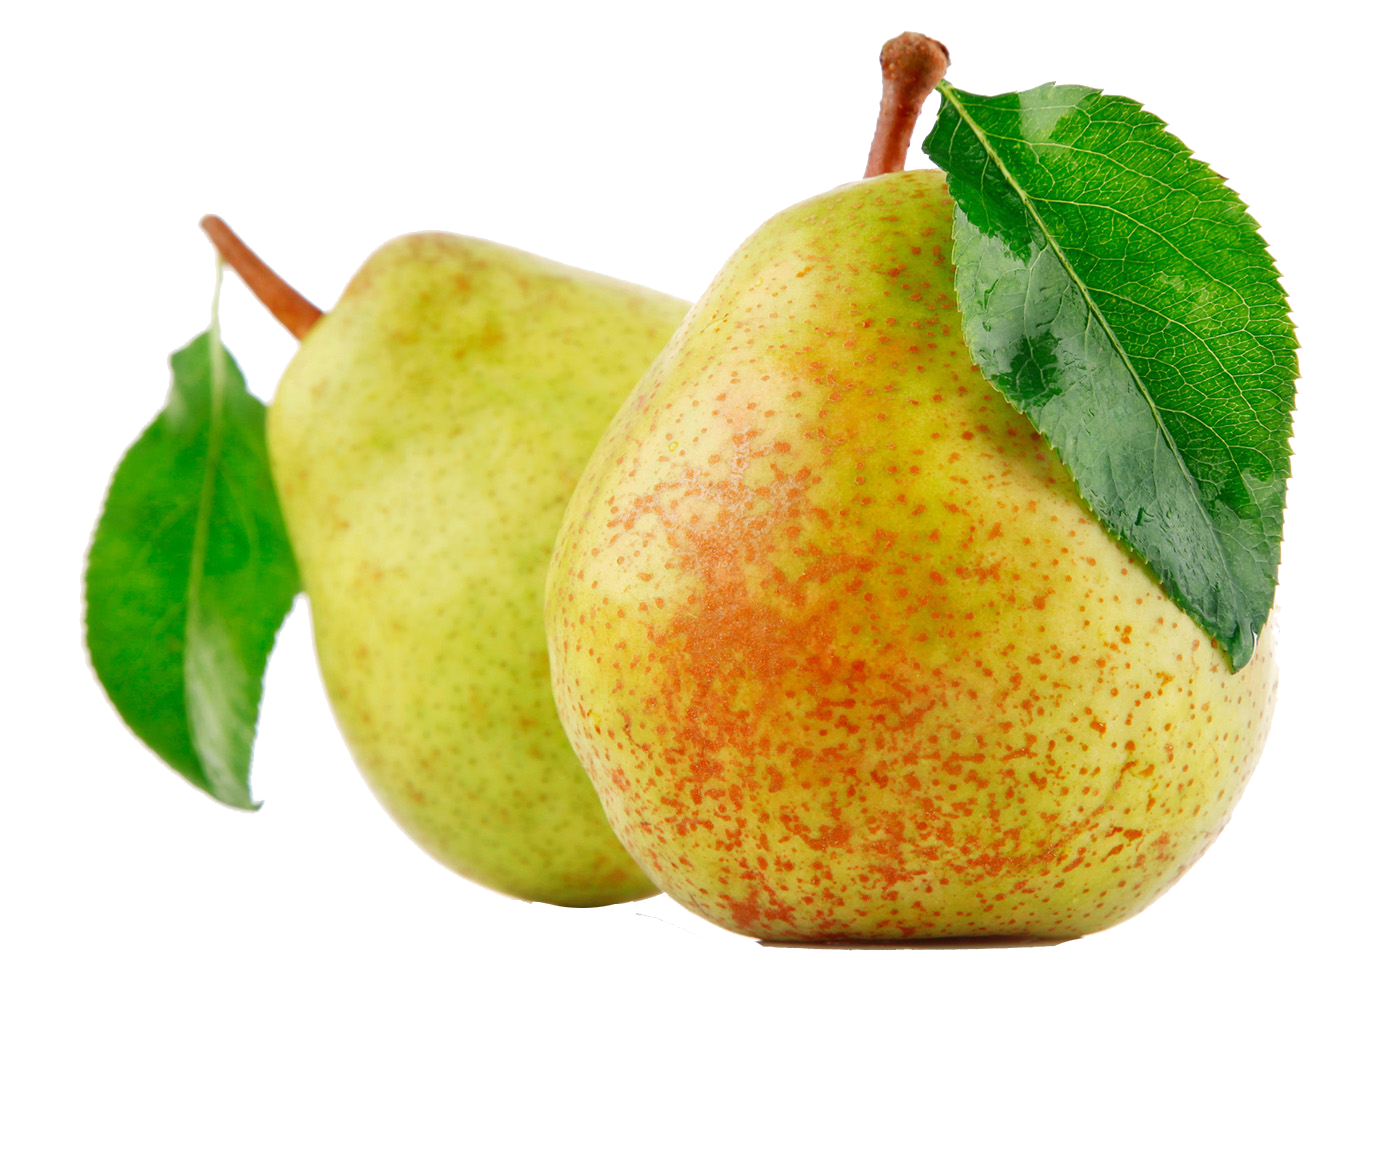 Pears picture